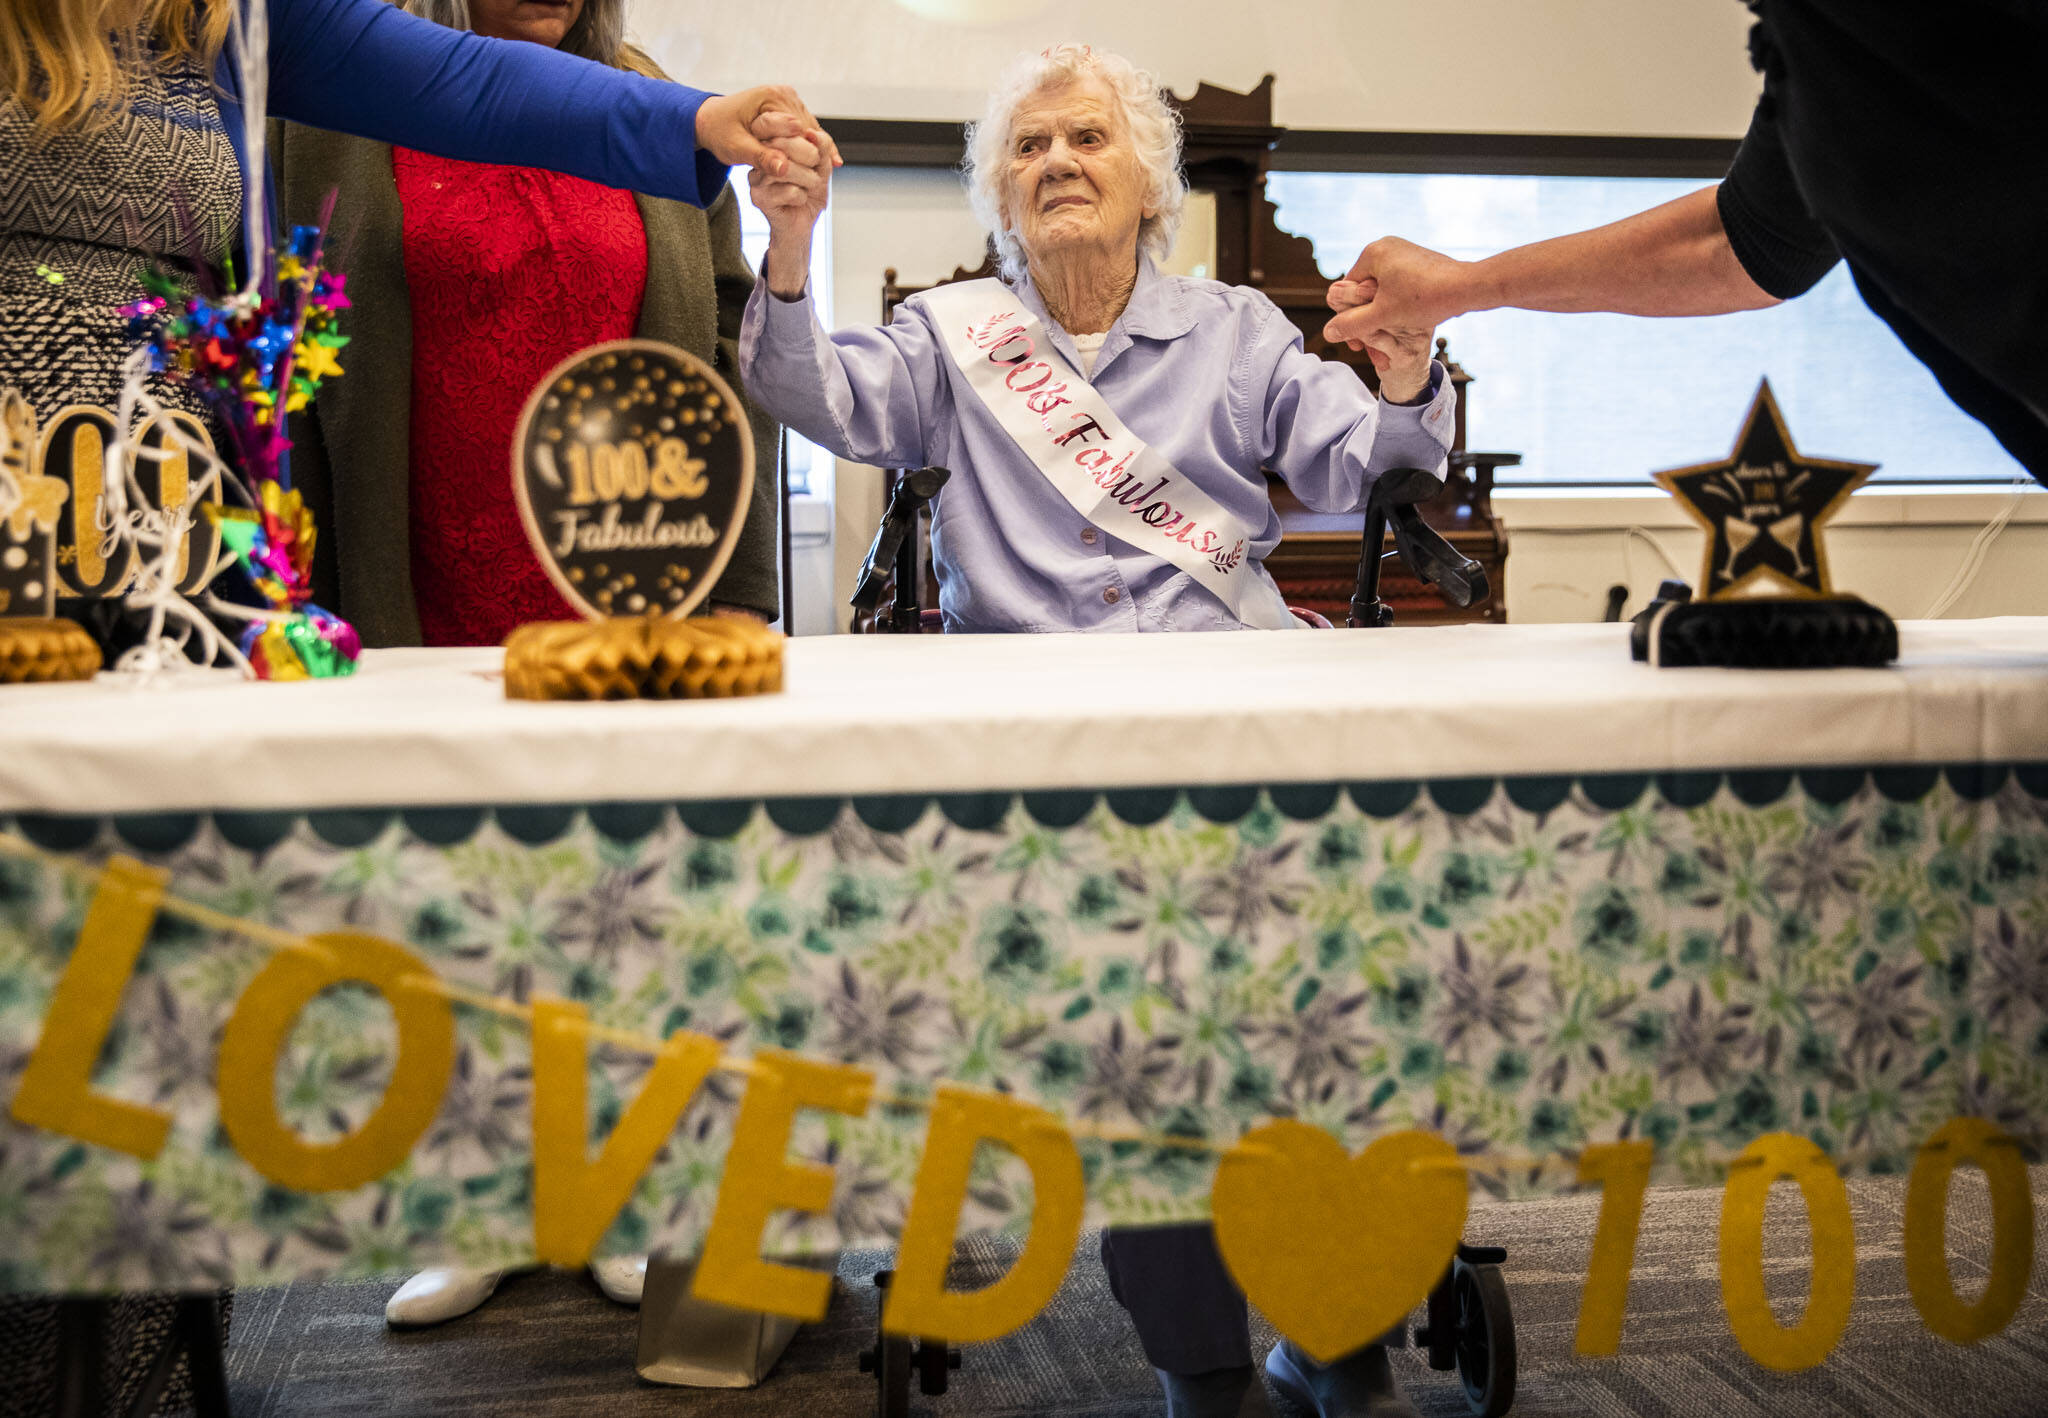 From her seat of honor, Ferne Ullestad holds family members’ hands during her 100th birthday celebration Saturday. (Olivia Vanni / The Herald)